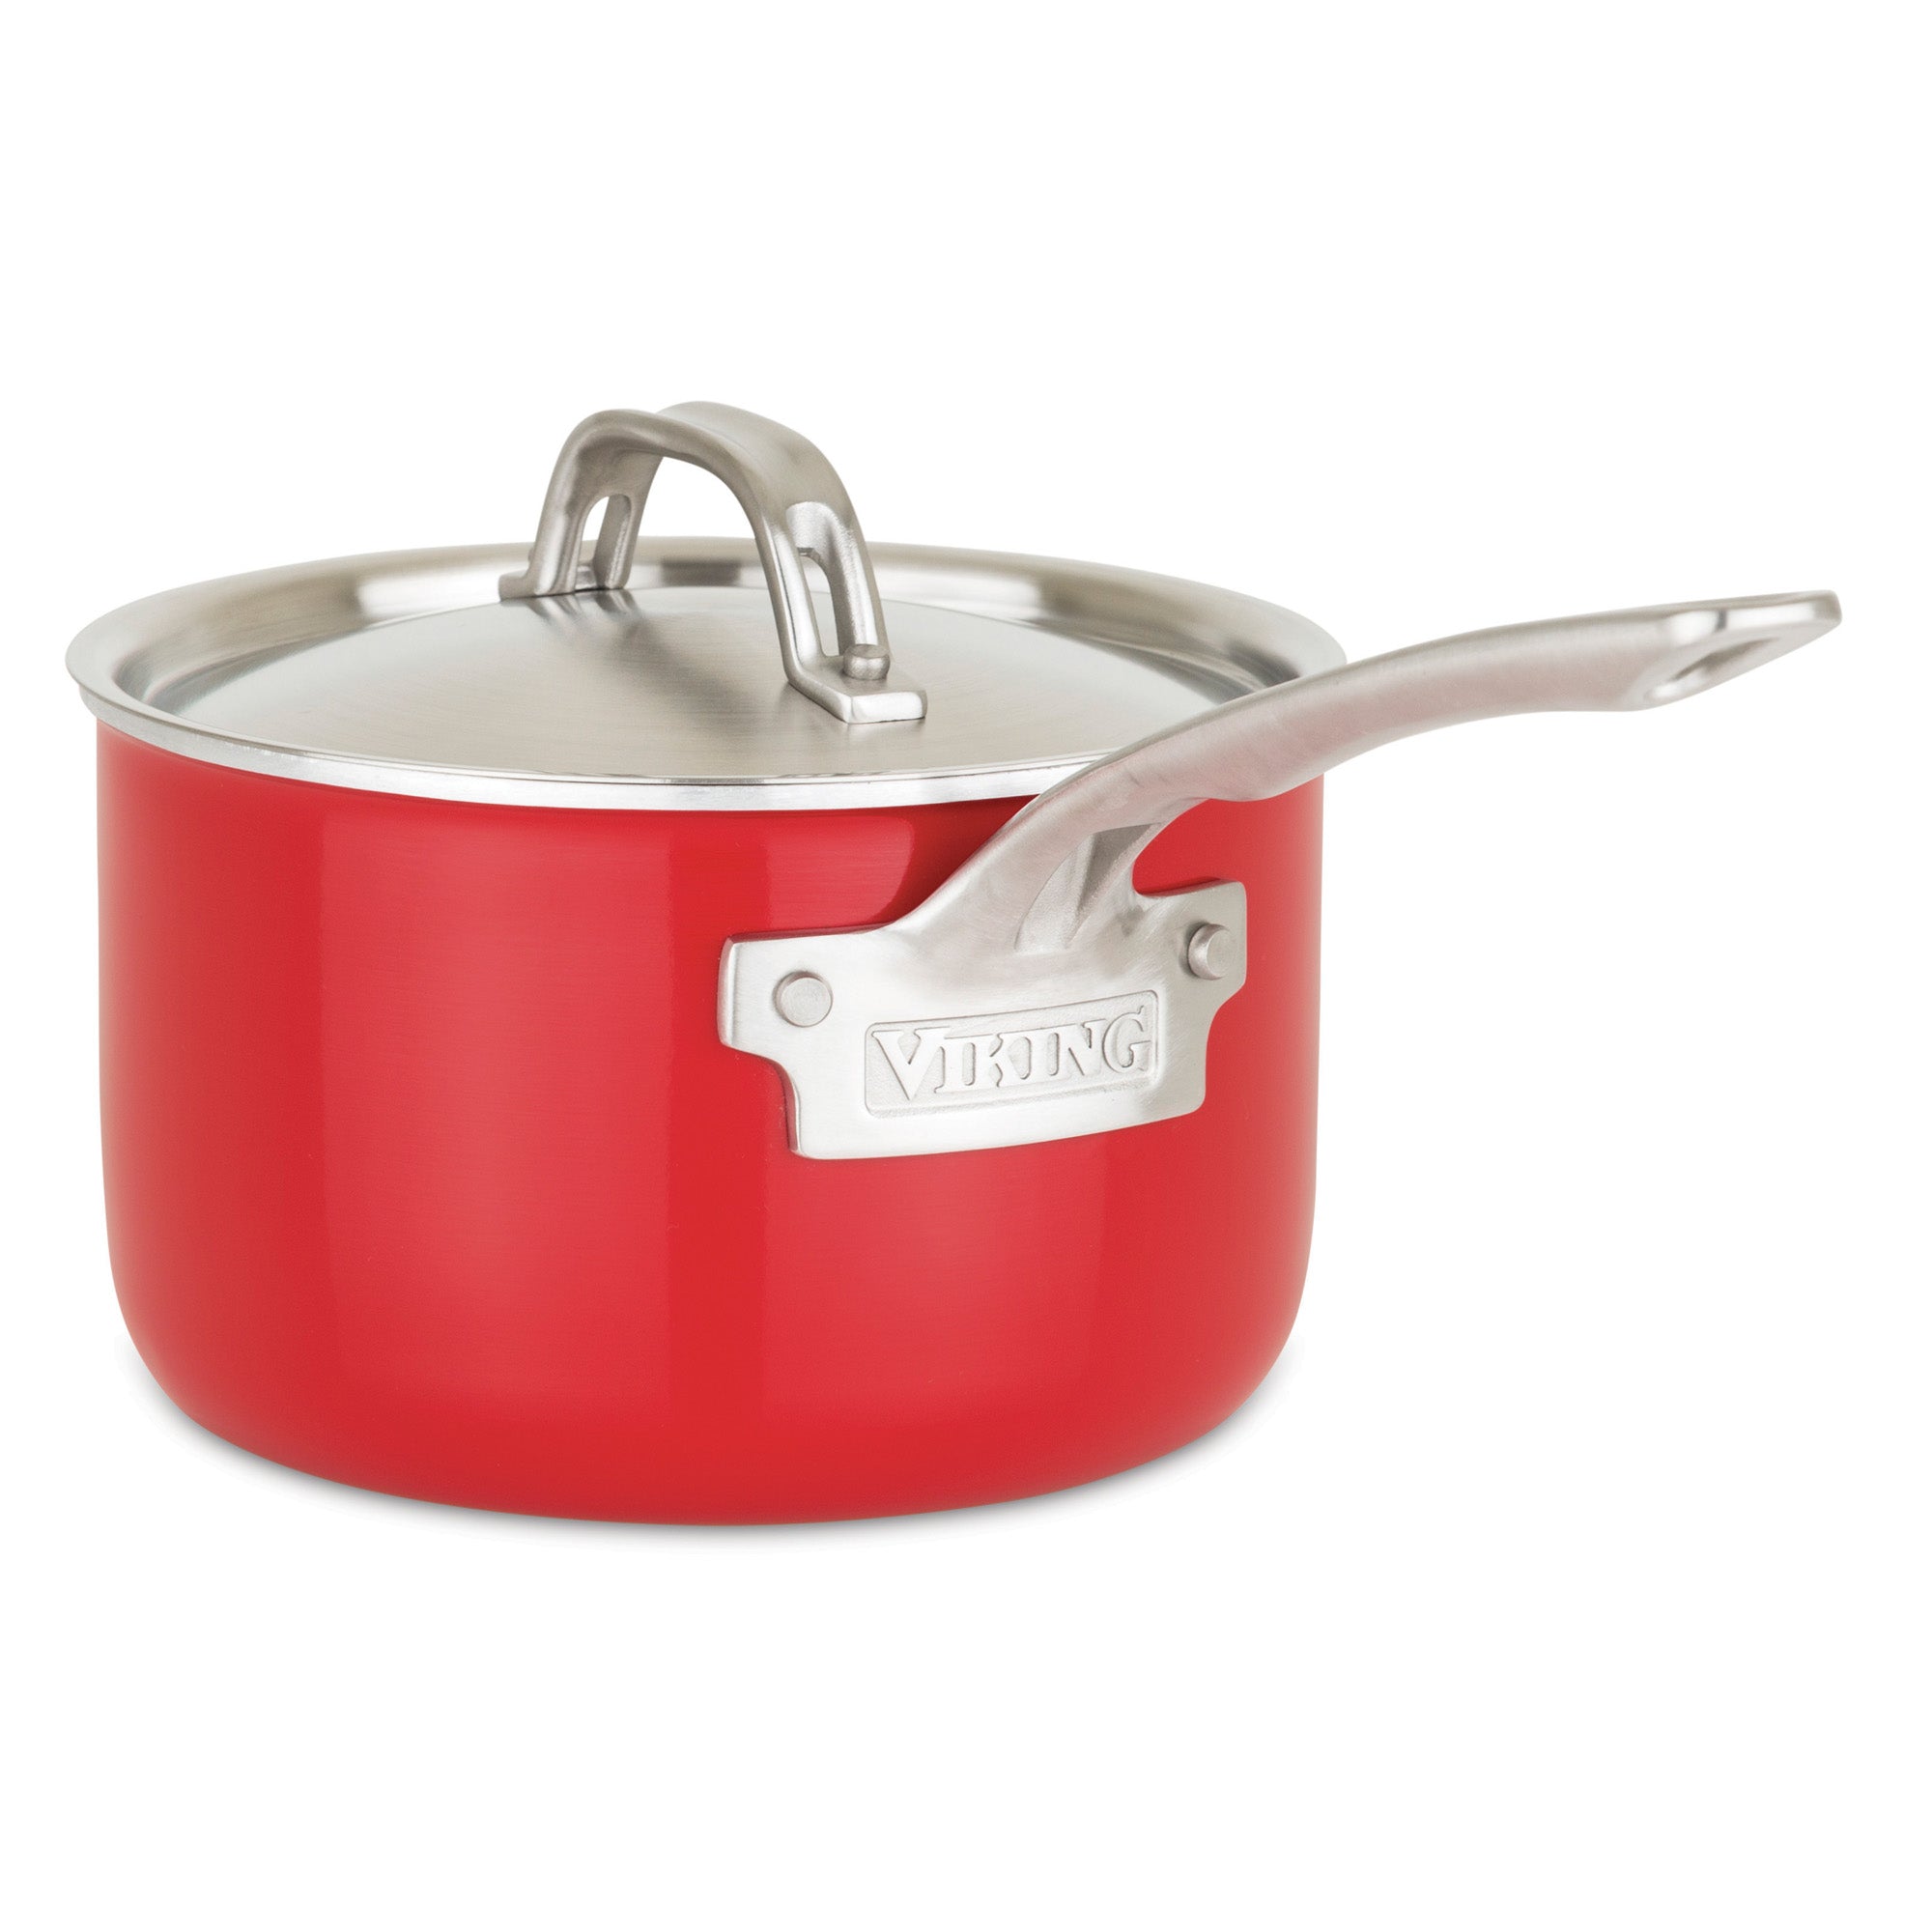 Viking Multi-Ply 2-Ply 11-Piece Red Cookware Set with Metal Lids